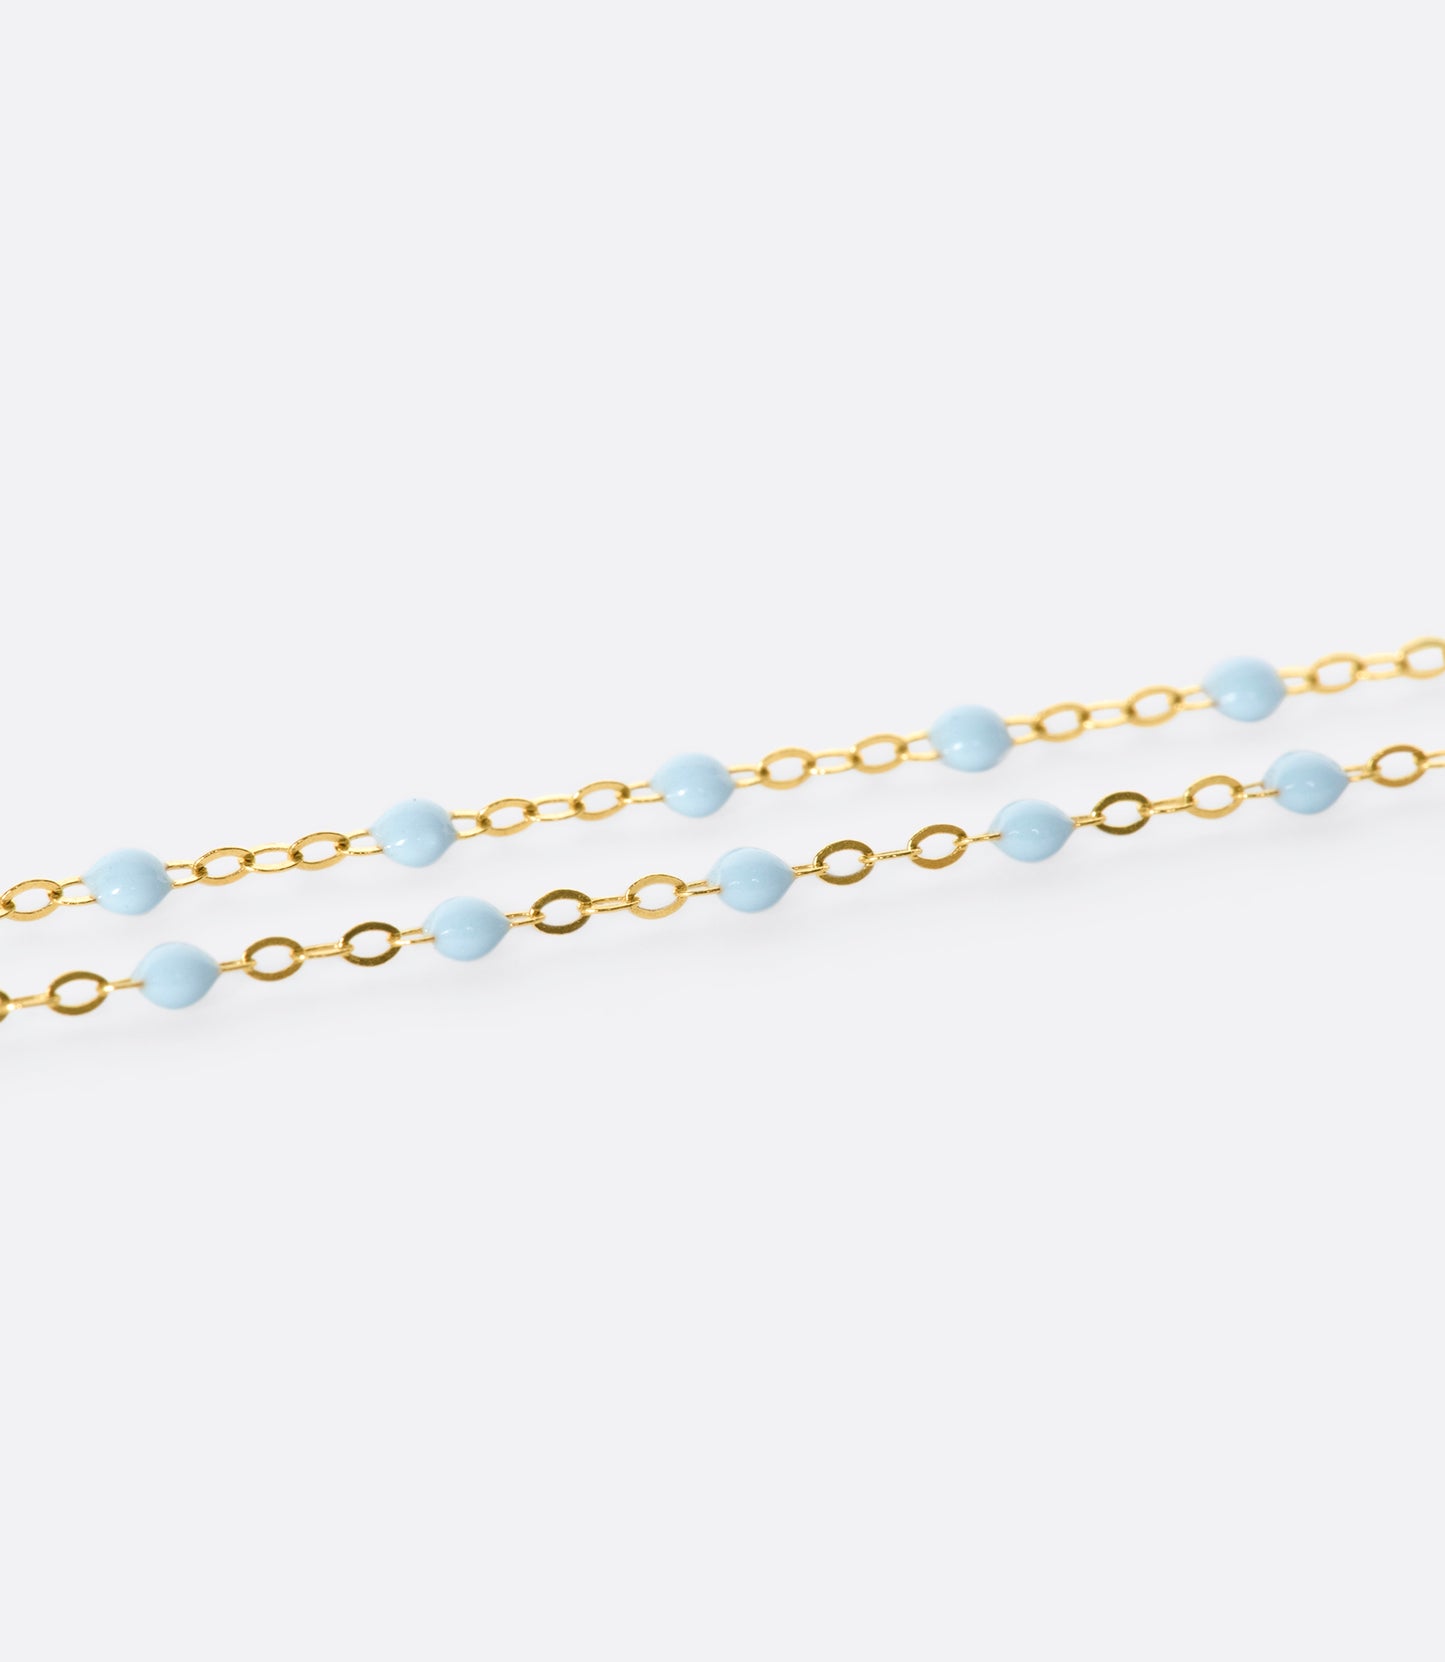 Thin 18k yellow gold chain necklace with resin beads. Each necklace is hand dipped in melted resin to create the beaded effect. 